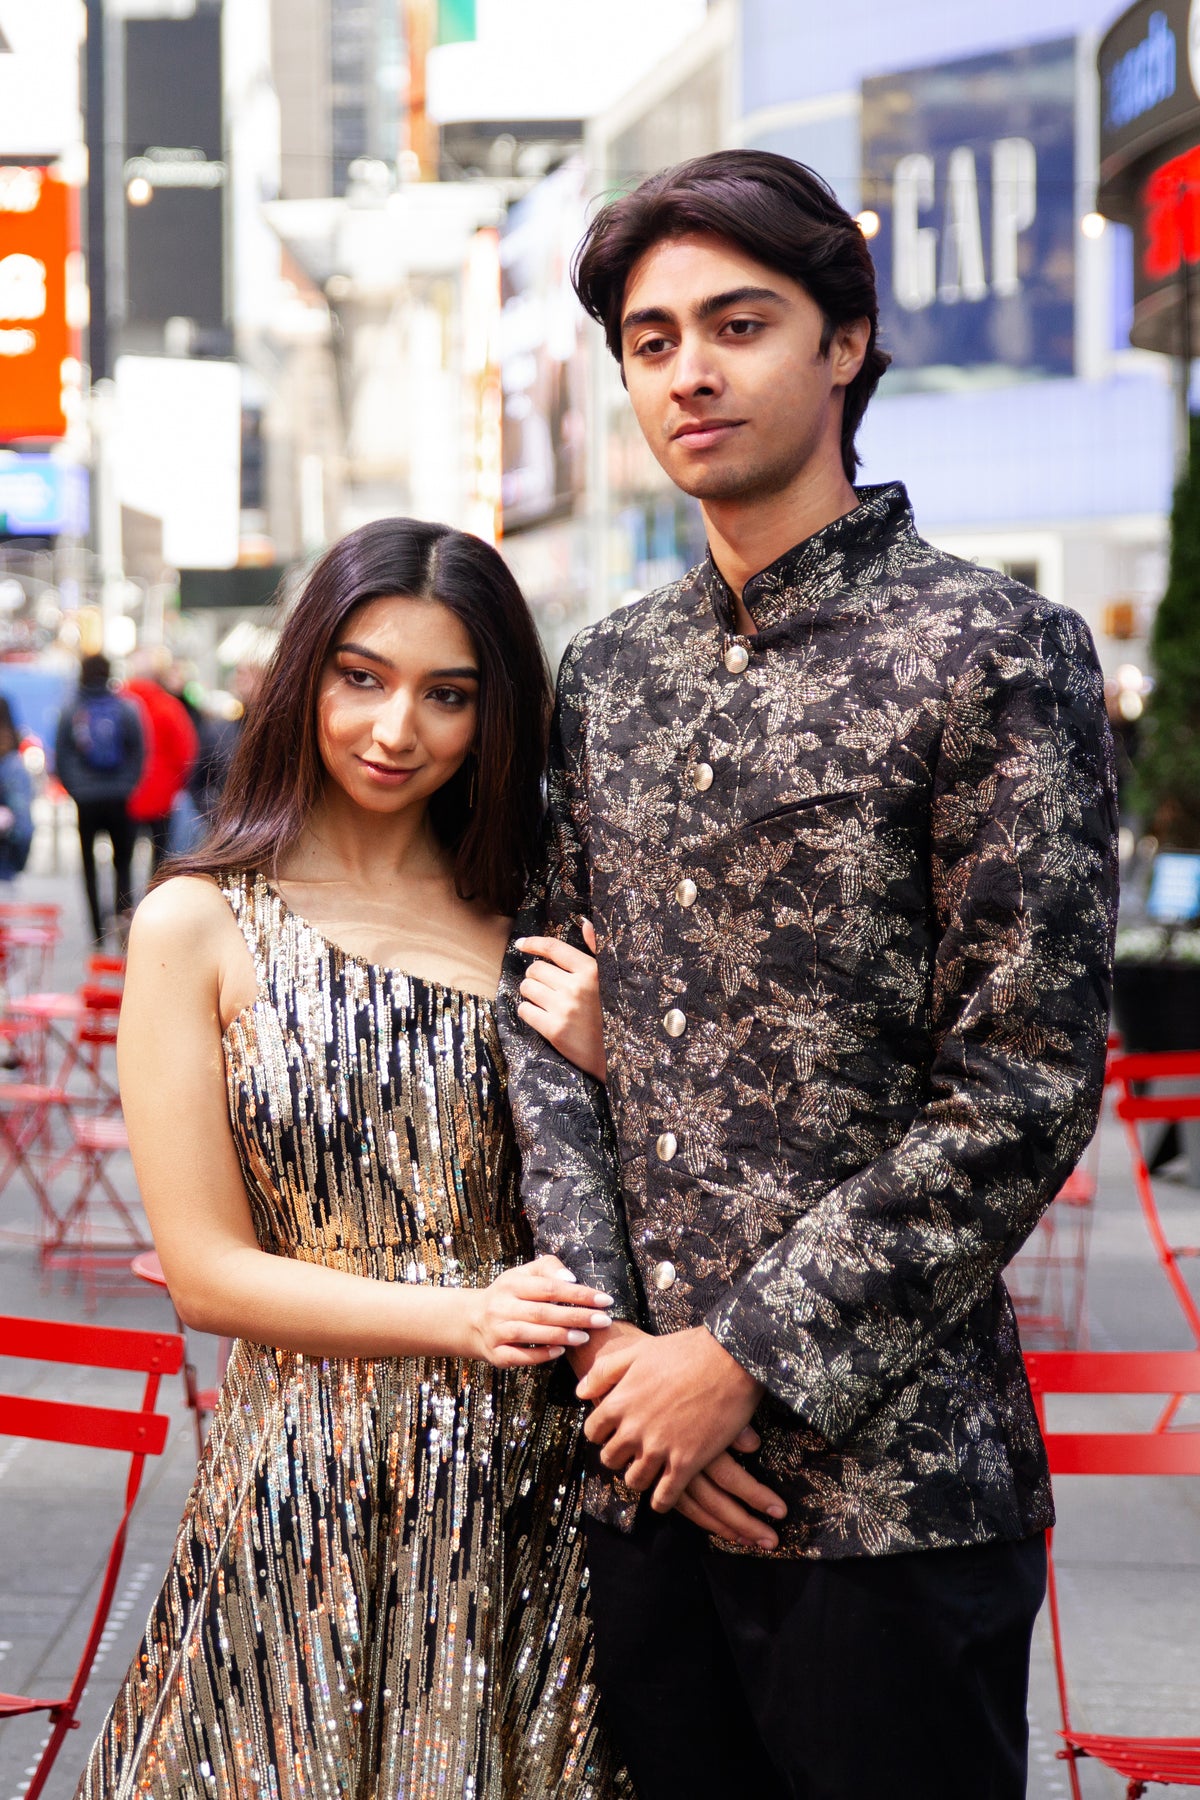 Man dressed in black and gold jodhpuri jacket with floral jacquard design next to a woman in a black and gold sequin dress